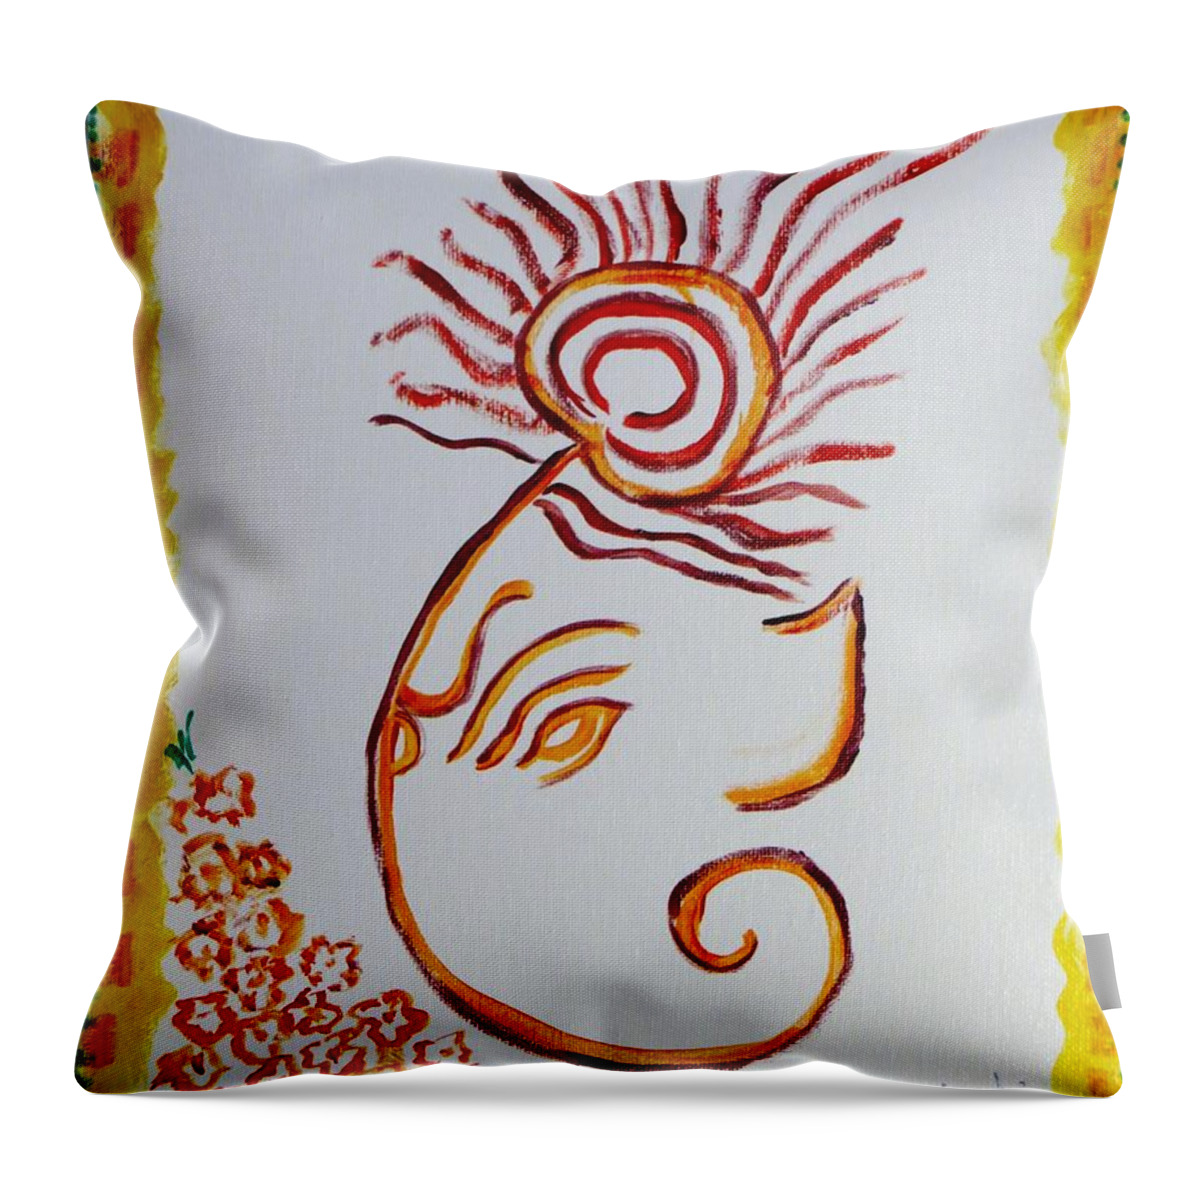 Lord Ganesha Throw Pillow featuring the painting Artistic Lord Ganesha by Sonali Gangane